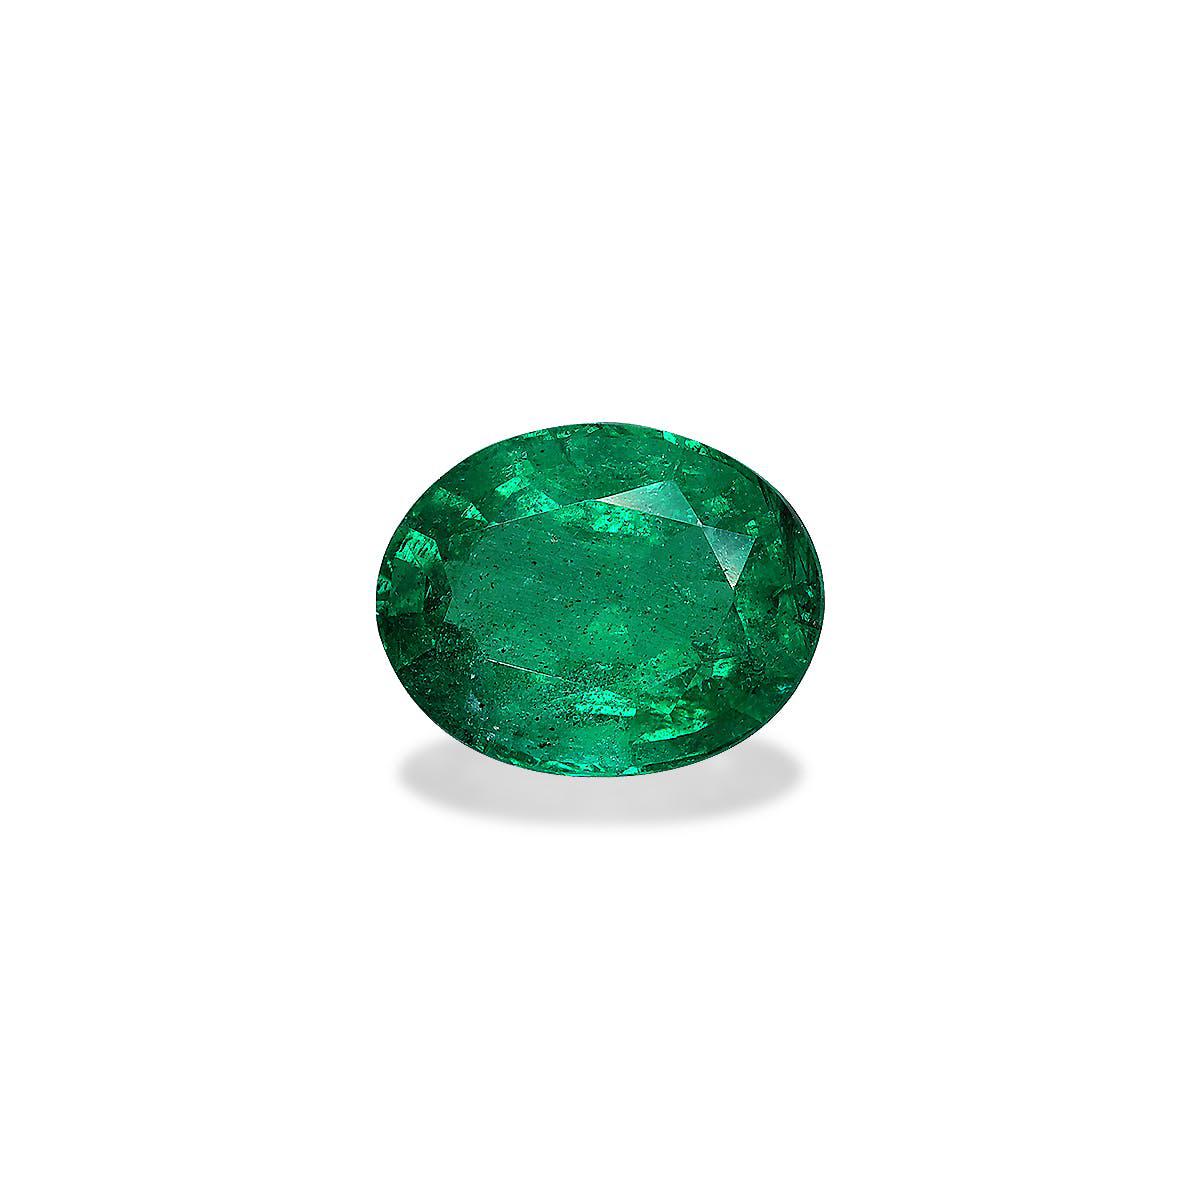 Picture of Green Zambian Emerald 2.56ct - 10x8mm (PG0325)